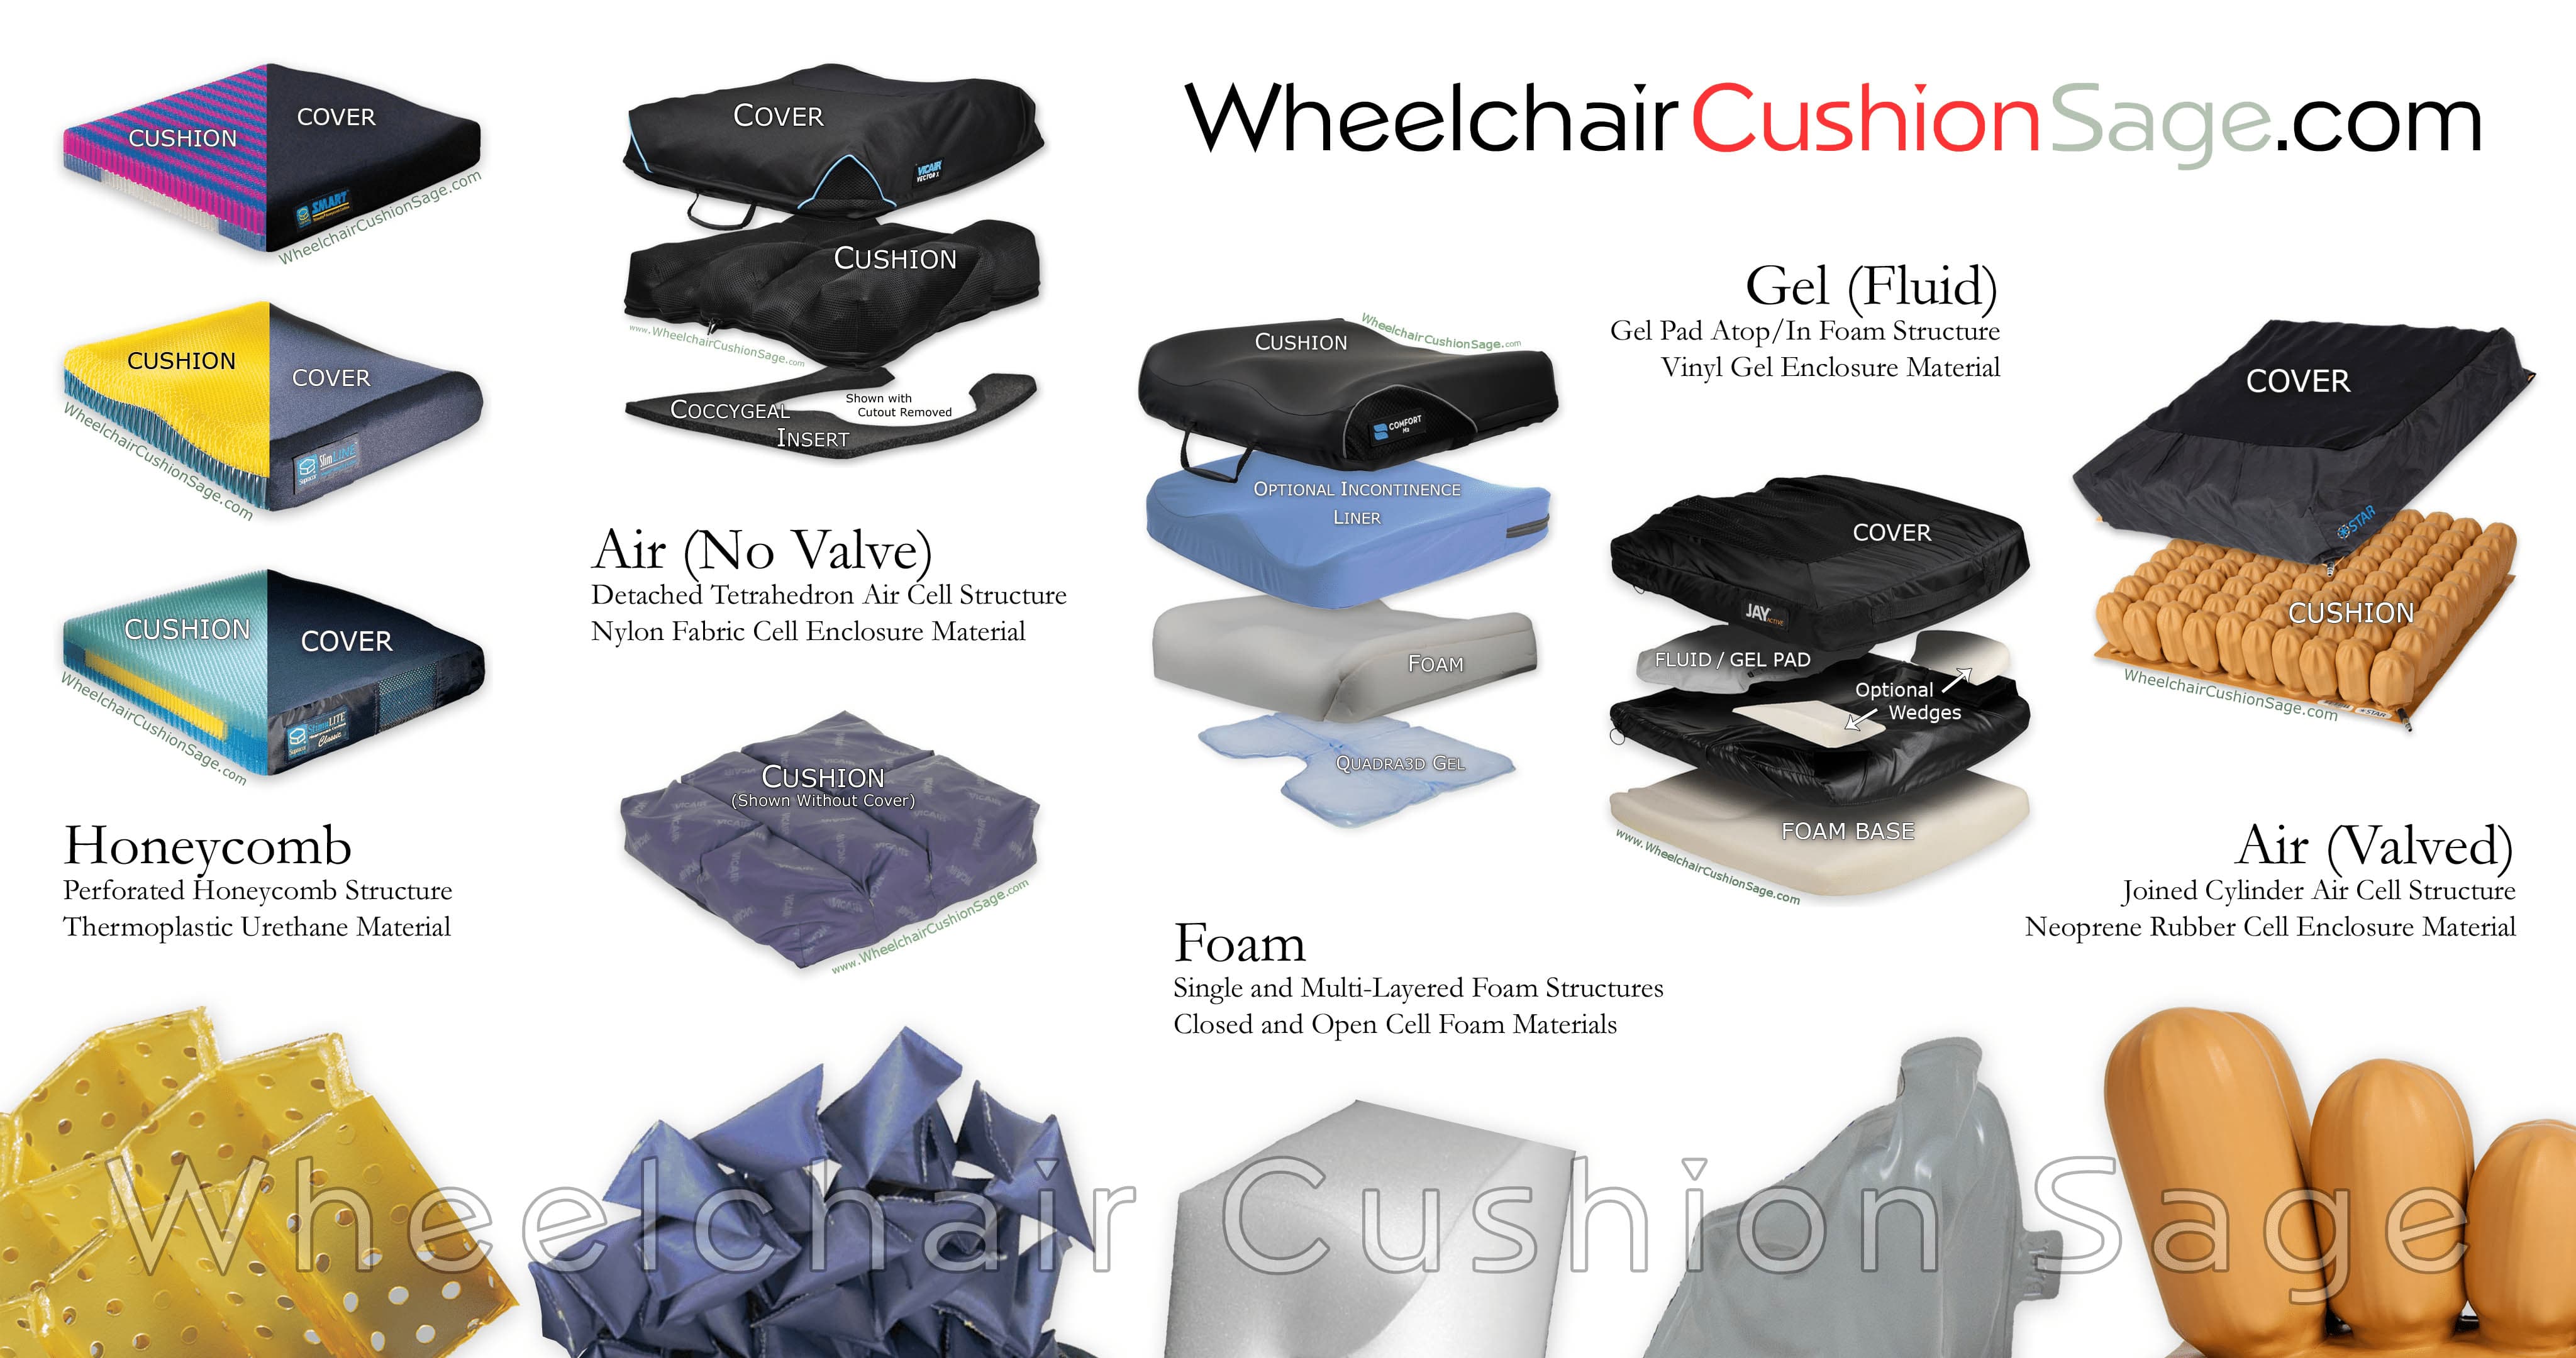 Wheelchair Cushions: How a Flawed System Affects Cost and Quality